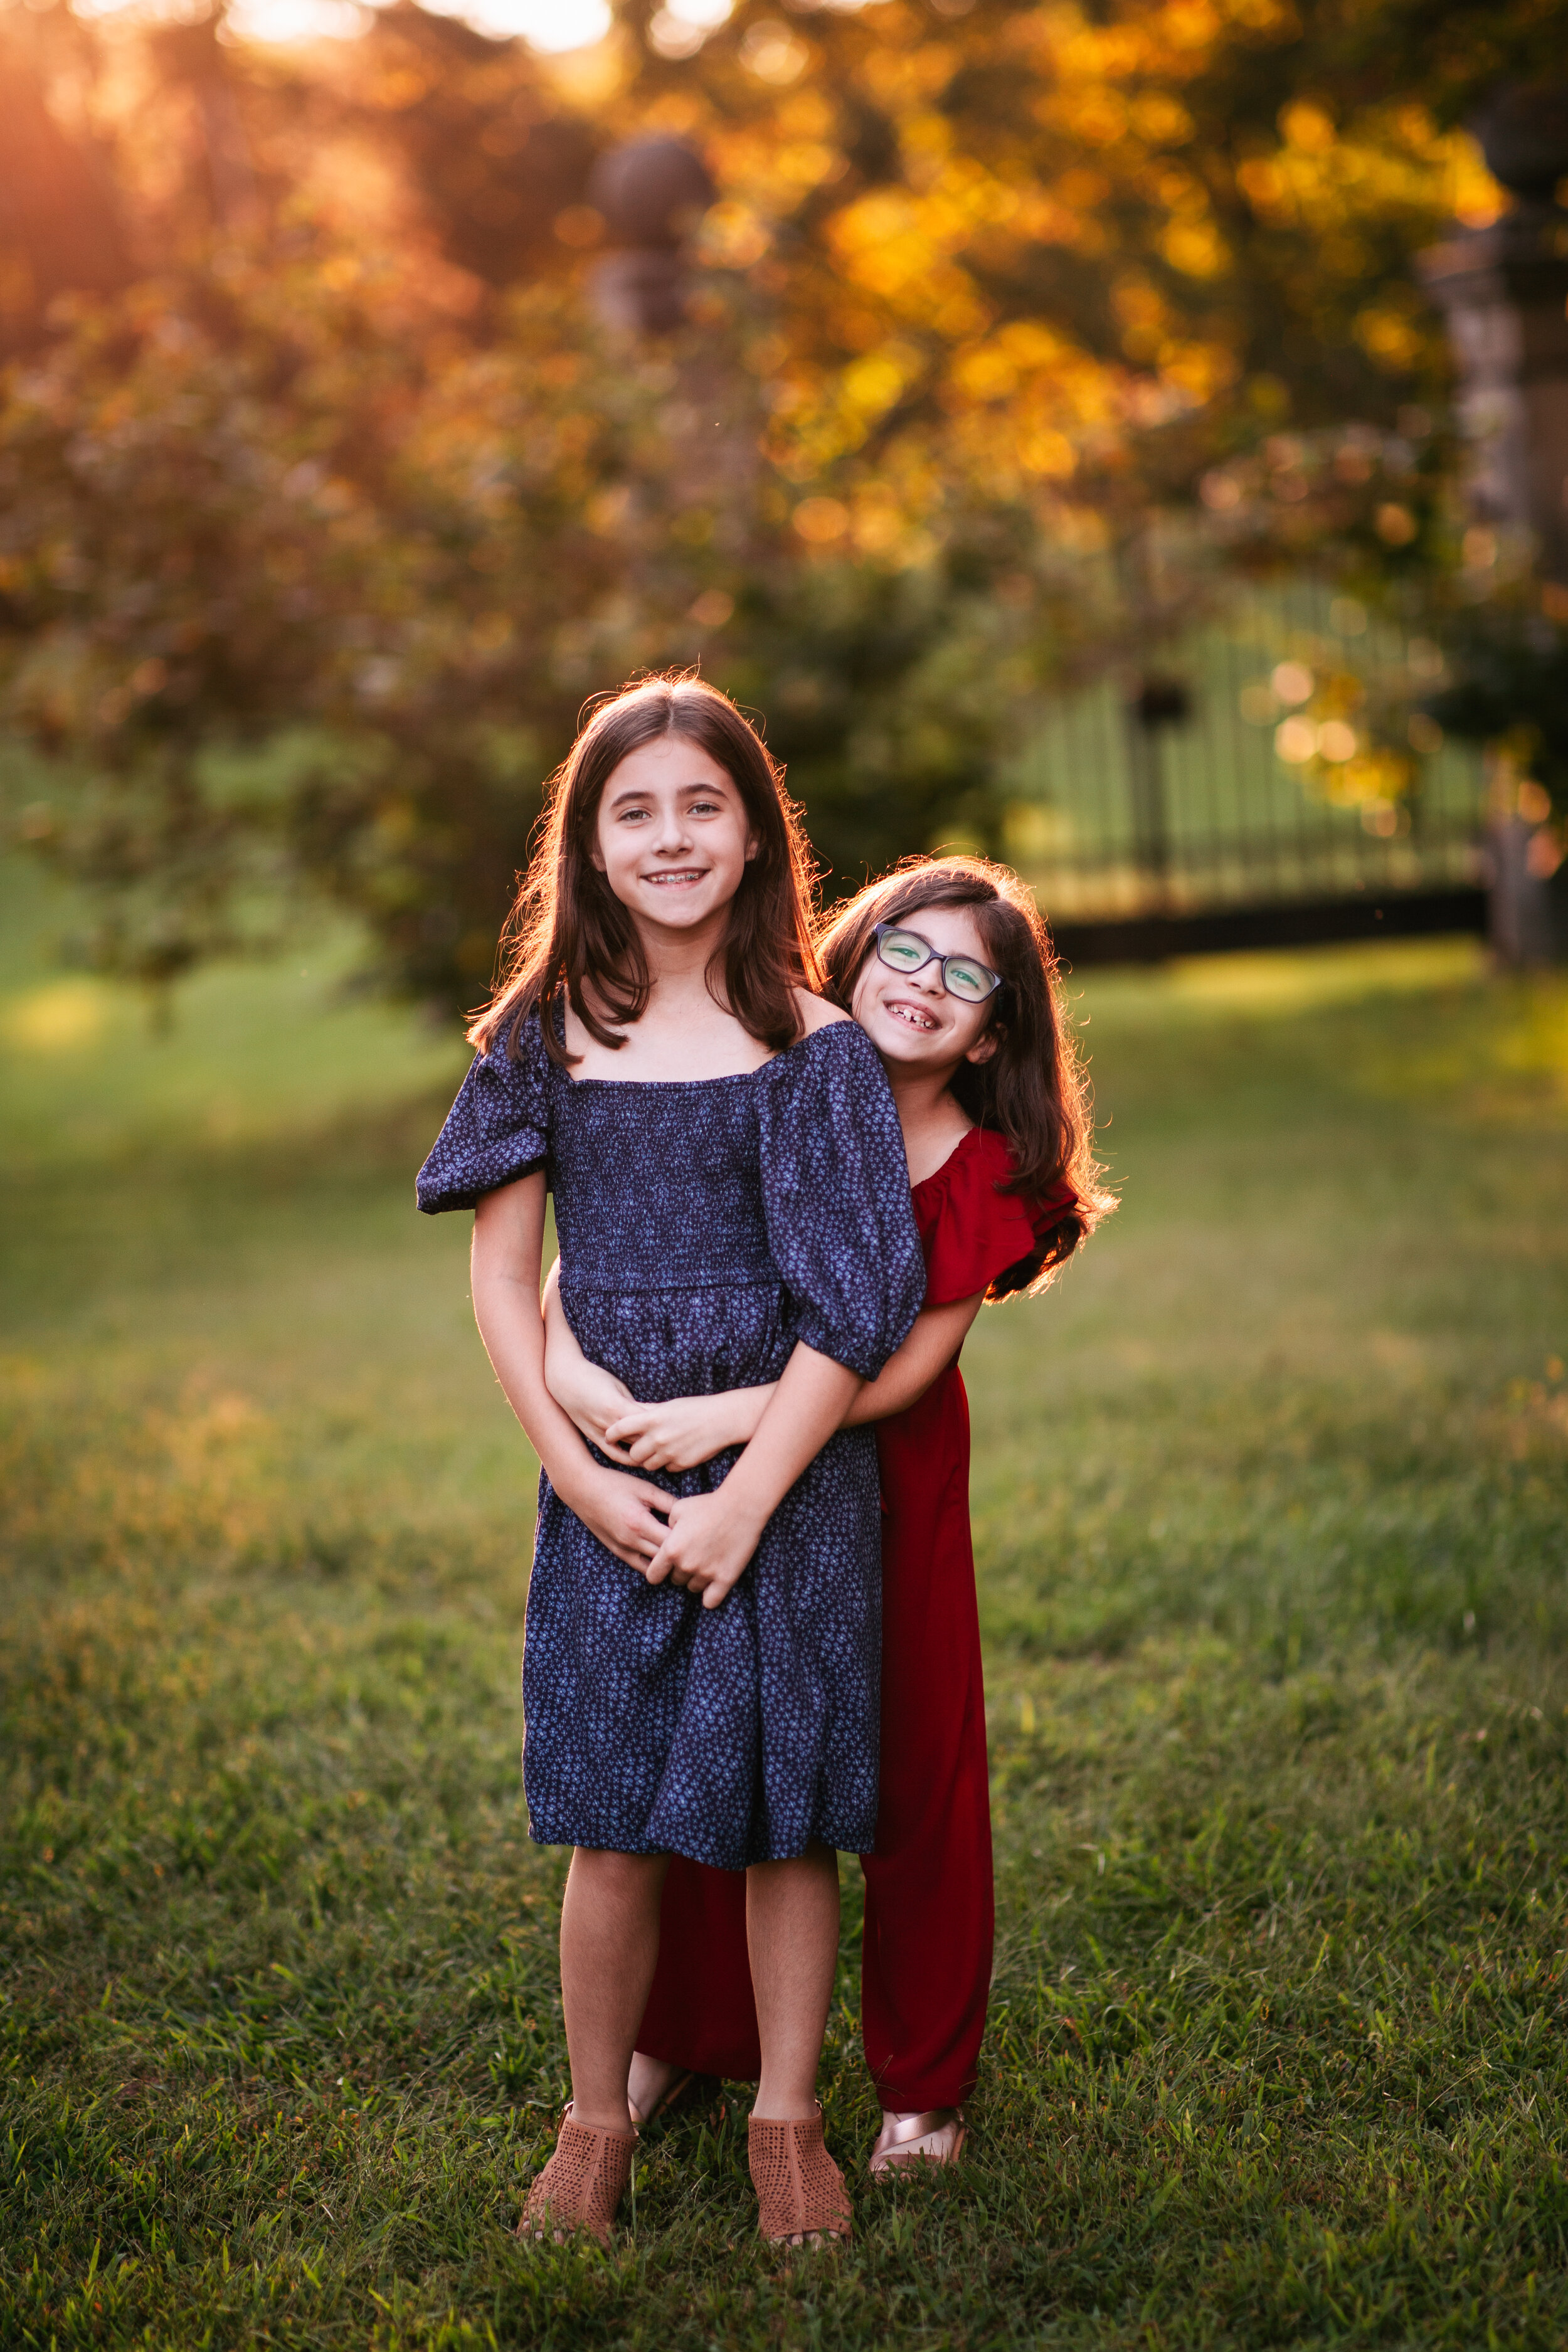  Little girl stands smiling while her young sister wraps her arms around her in a hug from behind 